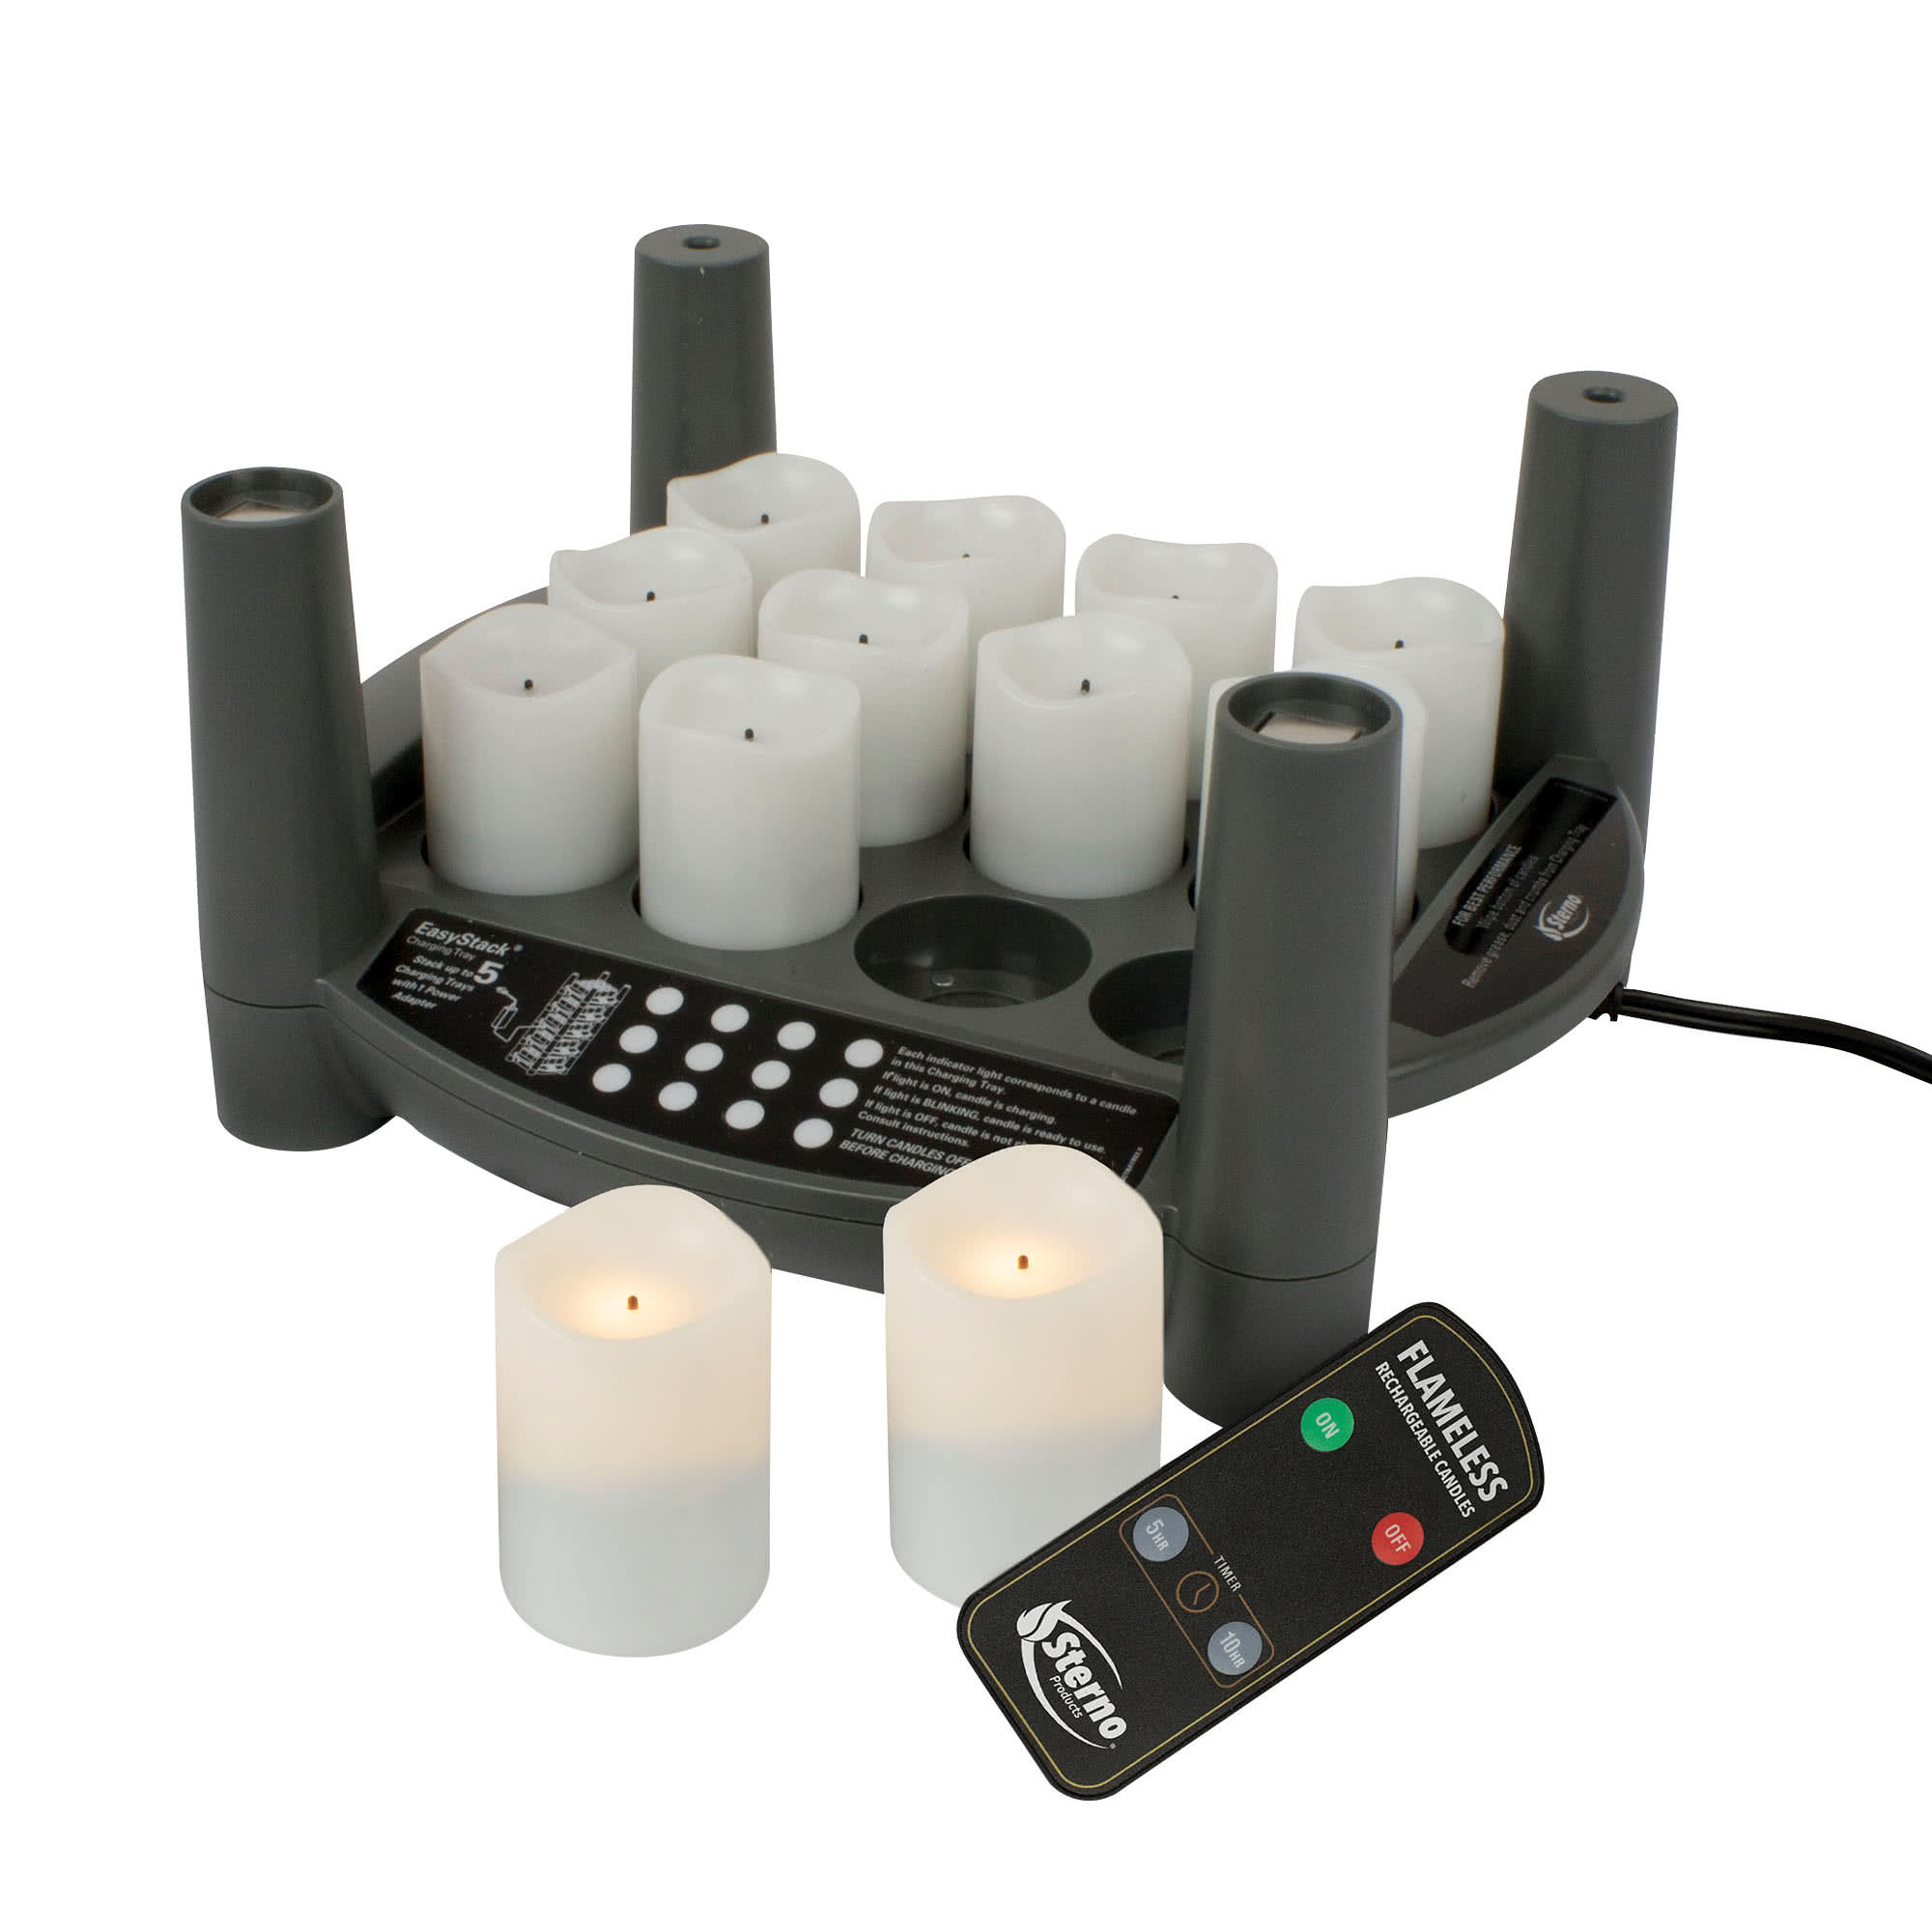 12PC WARM WHITE RECHARGEBALE
FLAMELESS VOTIVE SET
W/CHARGING BASE, POWER
ADAPTER AND TIMER REMOTE
STARTER KIT EACH